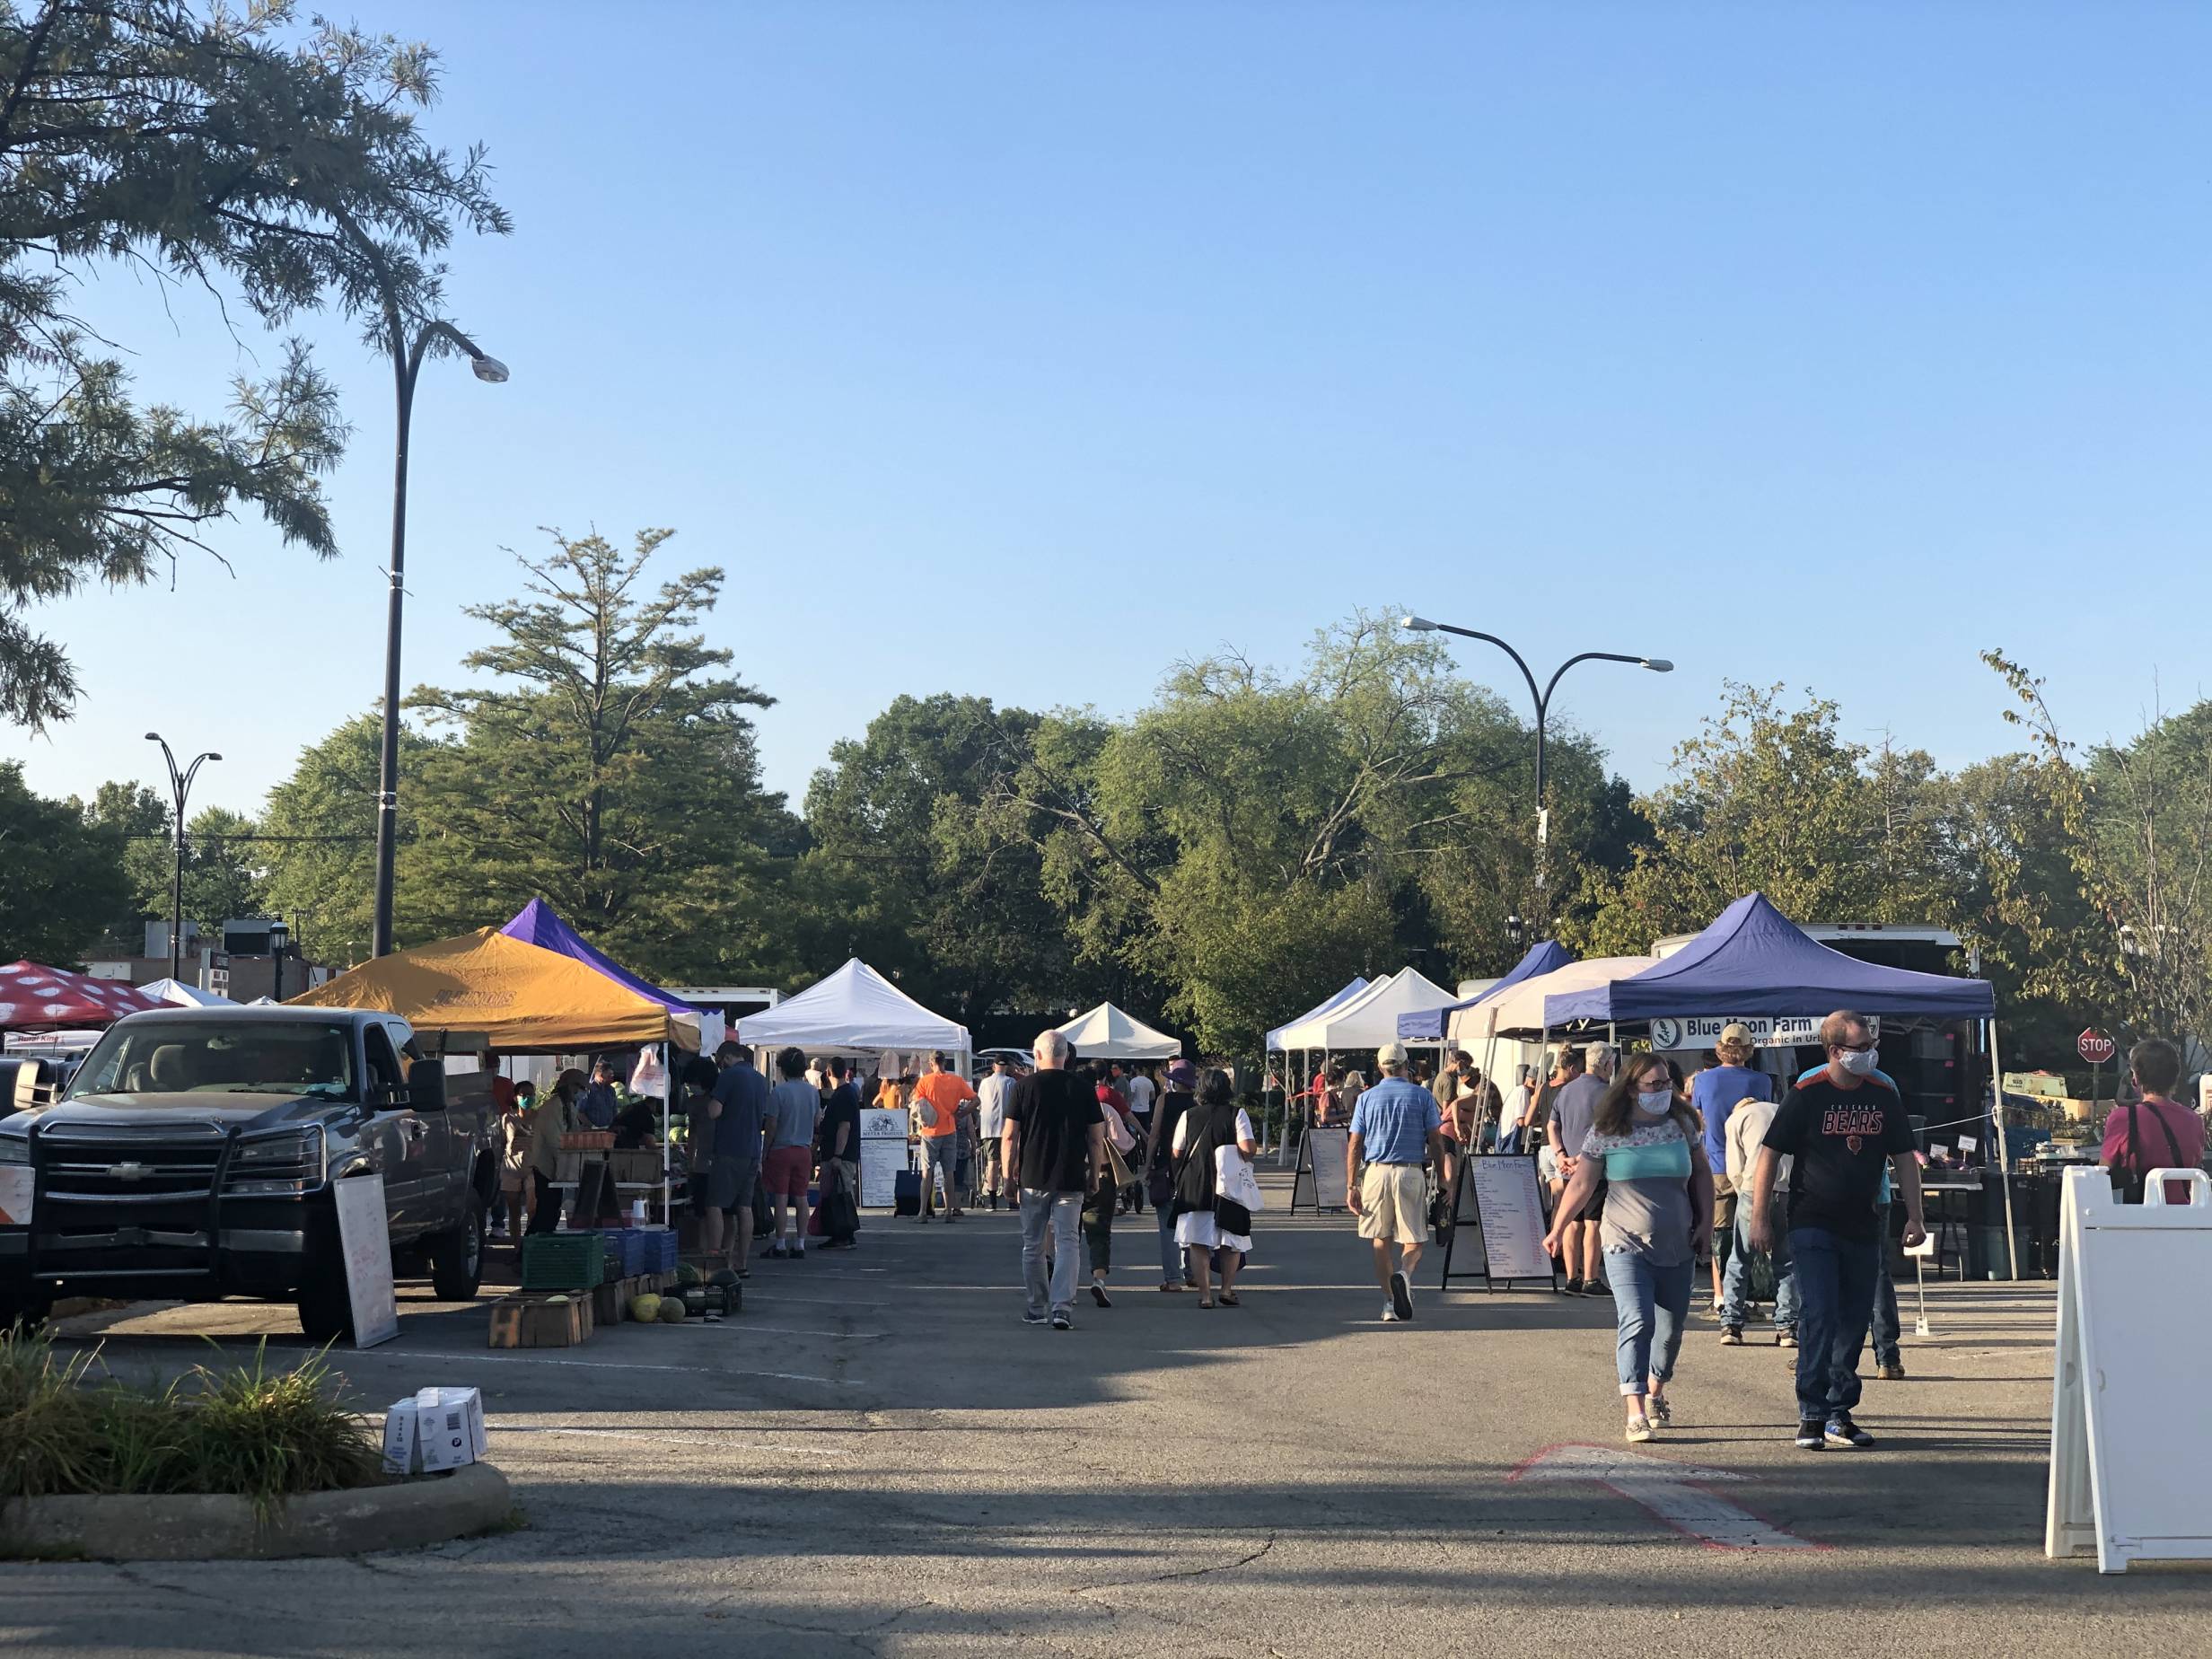 A busy Saturday morning at the Urbana Market in the Square with shoppers in masks visiting different vendors' tents in the parking lot of the Lincoln Square Mall. Photo by Alyssa Buckley.